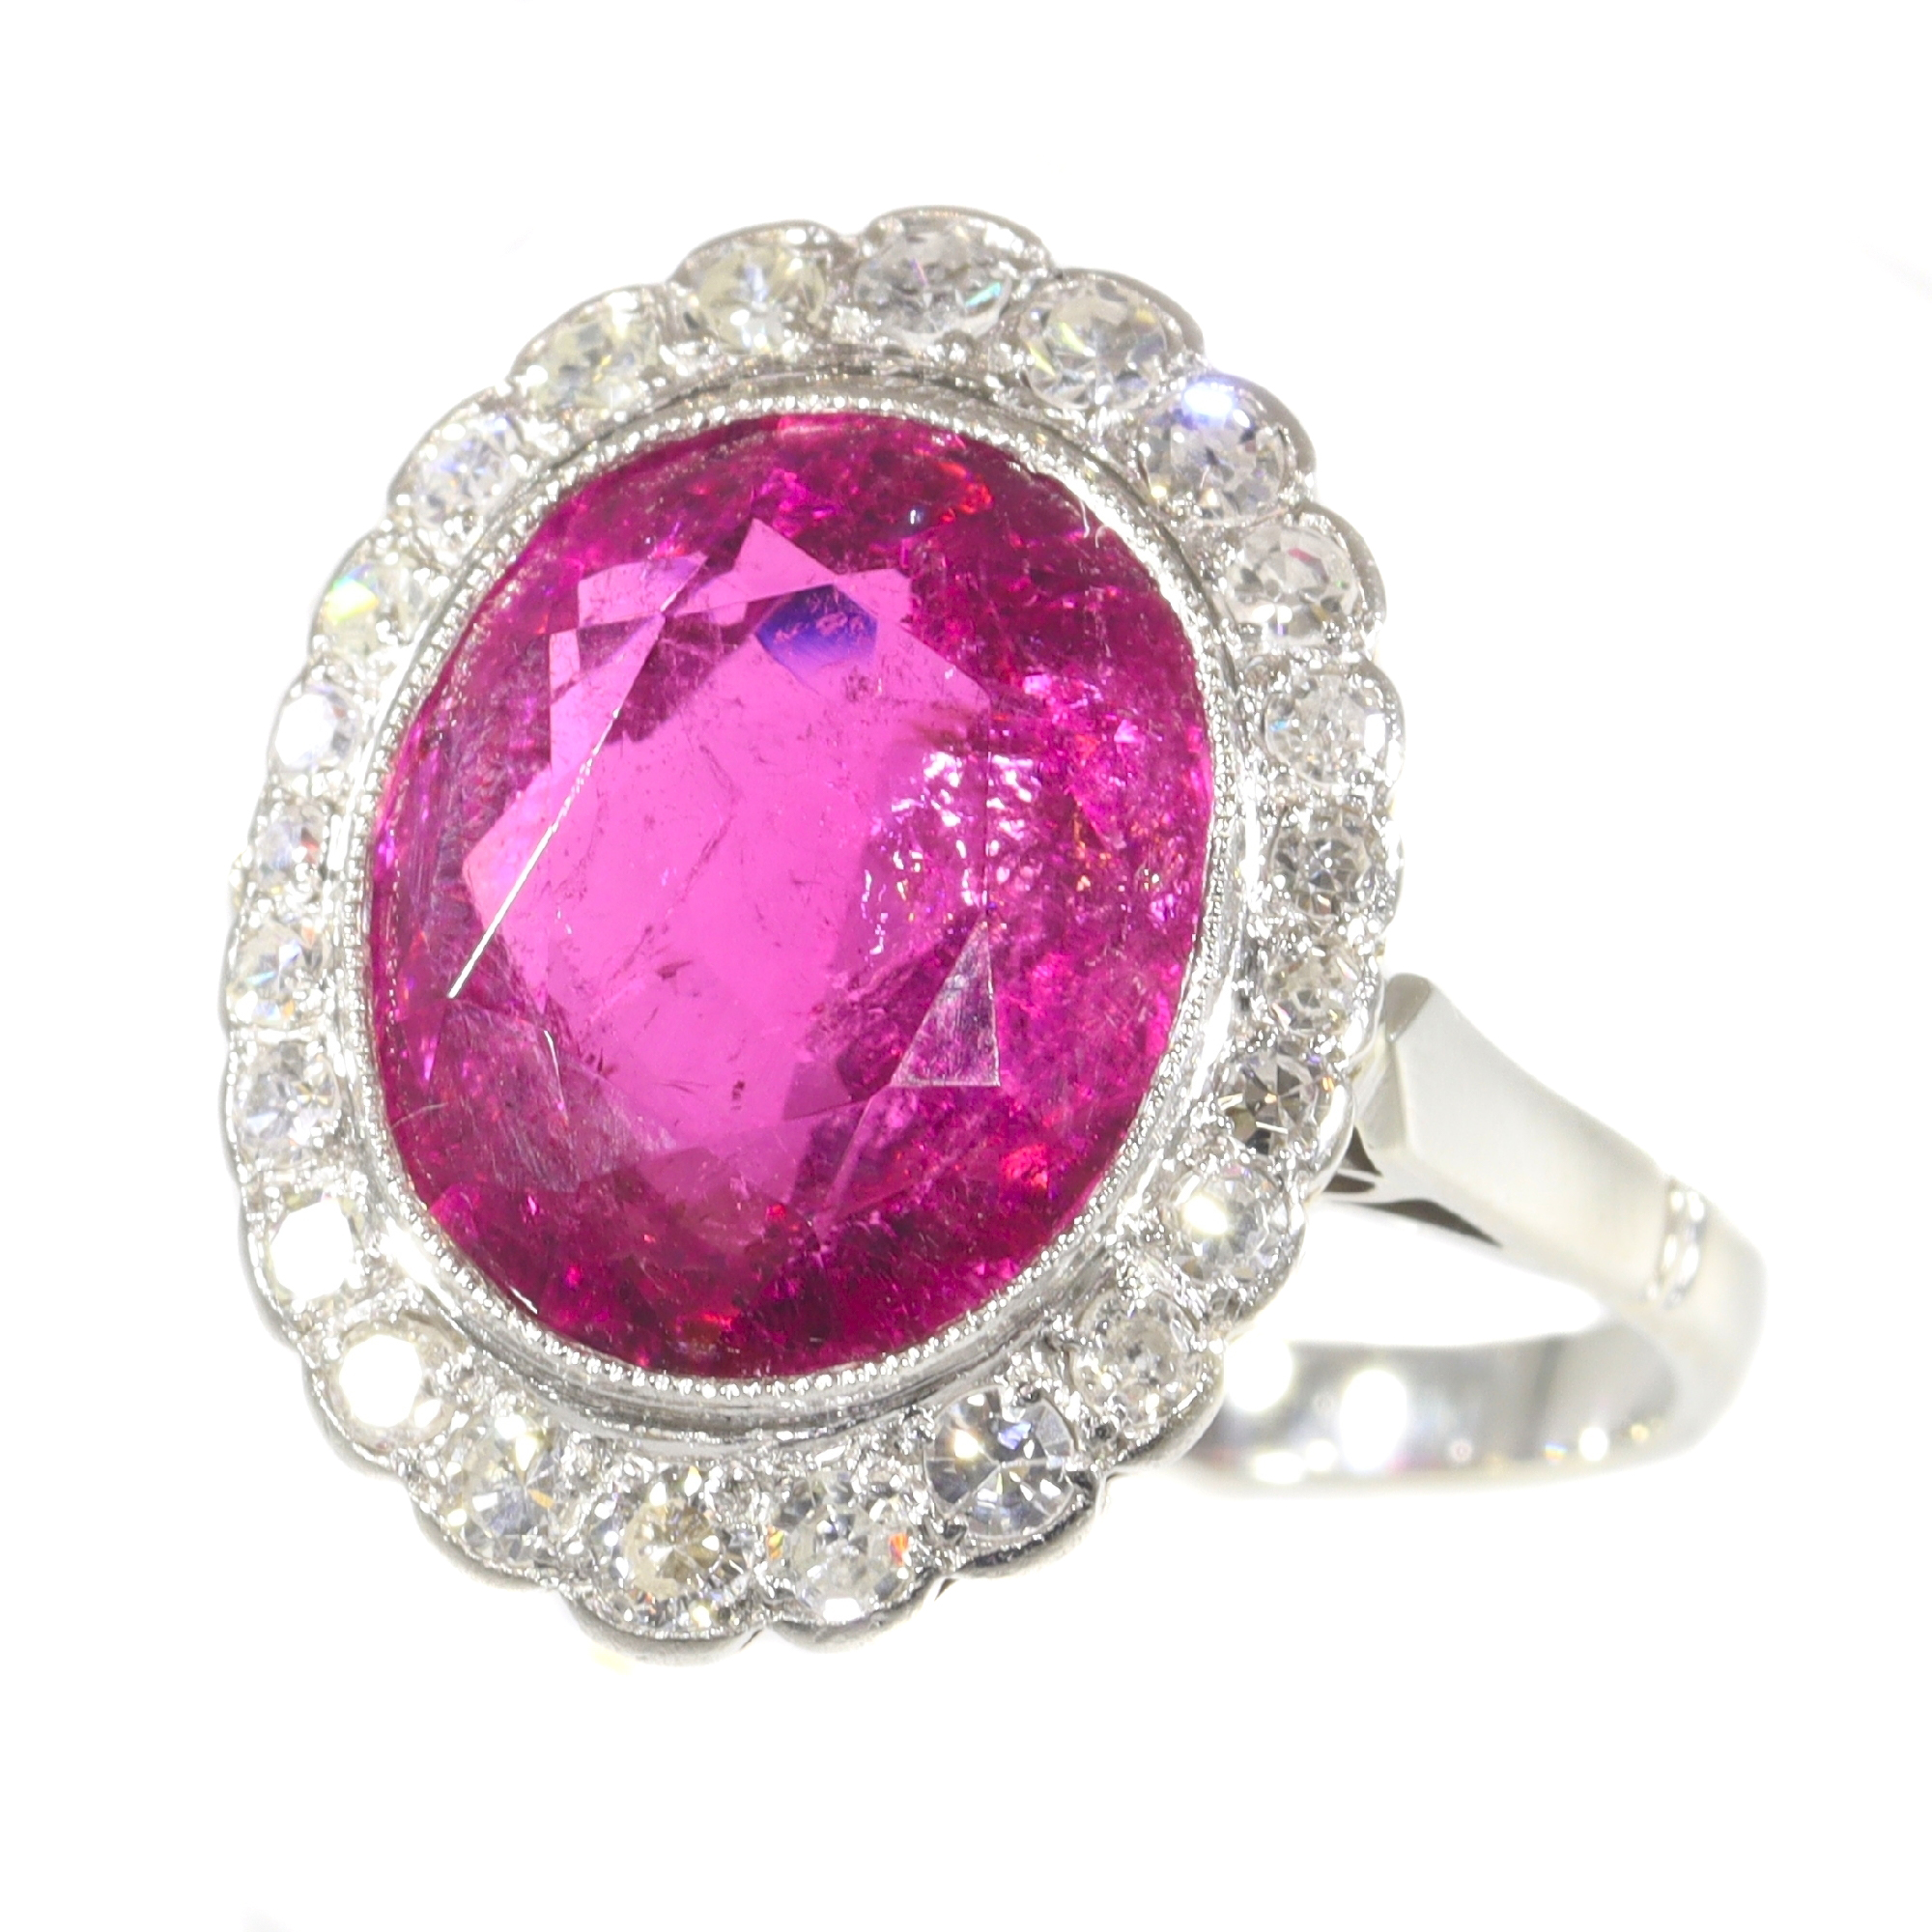 Fiery Love Embodied in a Vintage Rubellite Engagement Ring